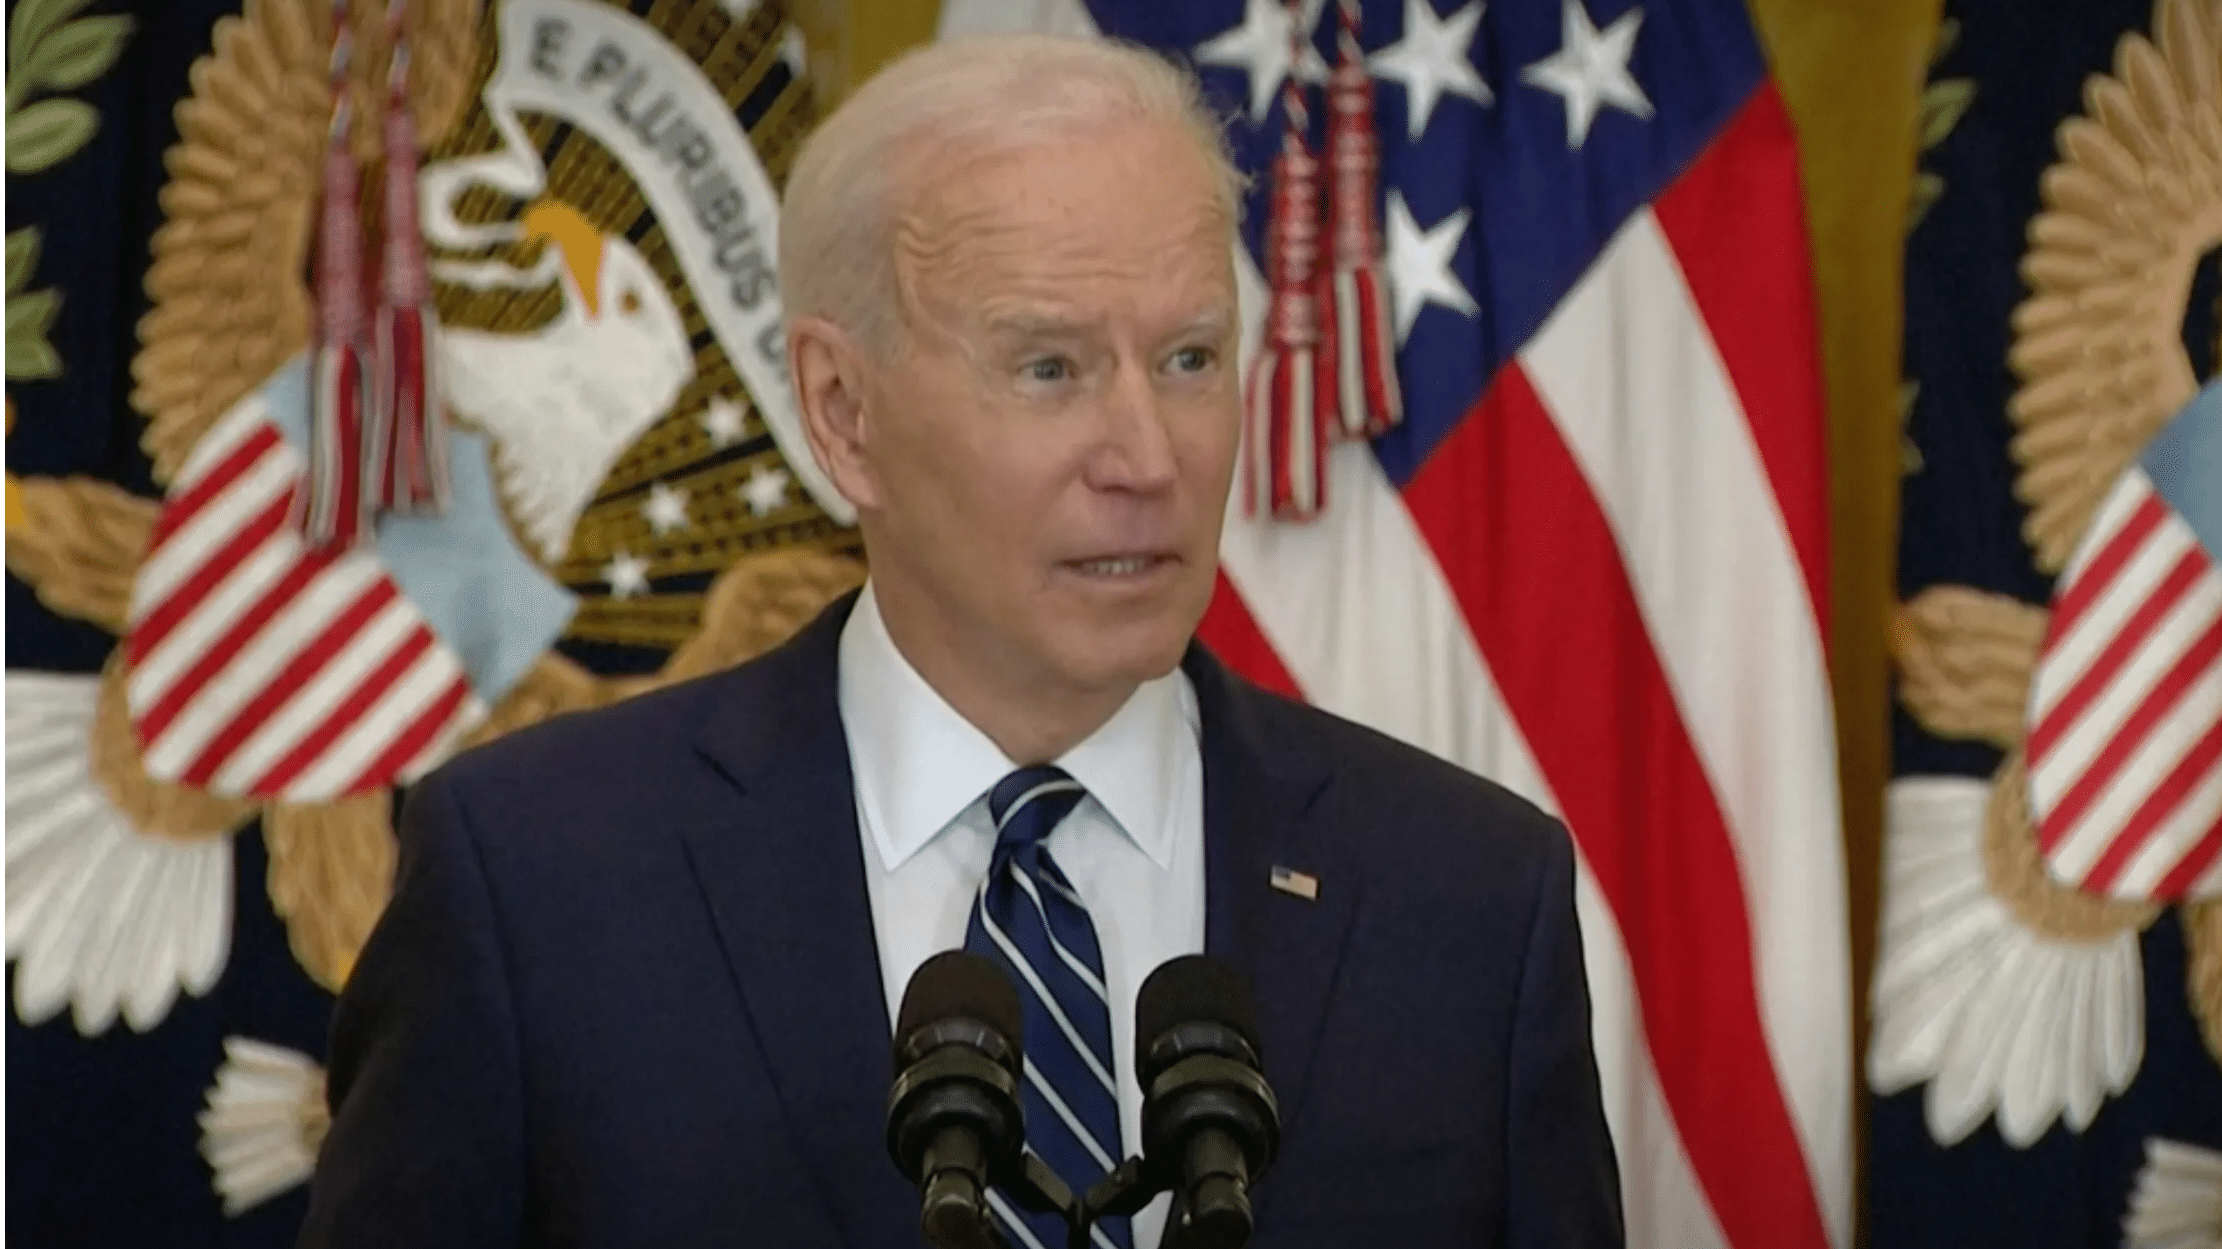 ‘America is going to hold China accountable’: Biden during his first presser